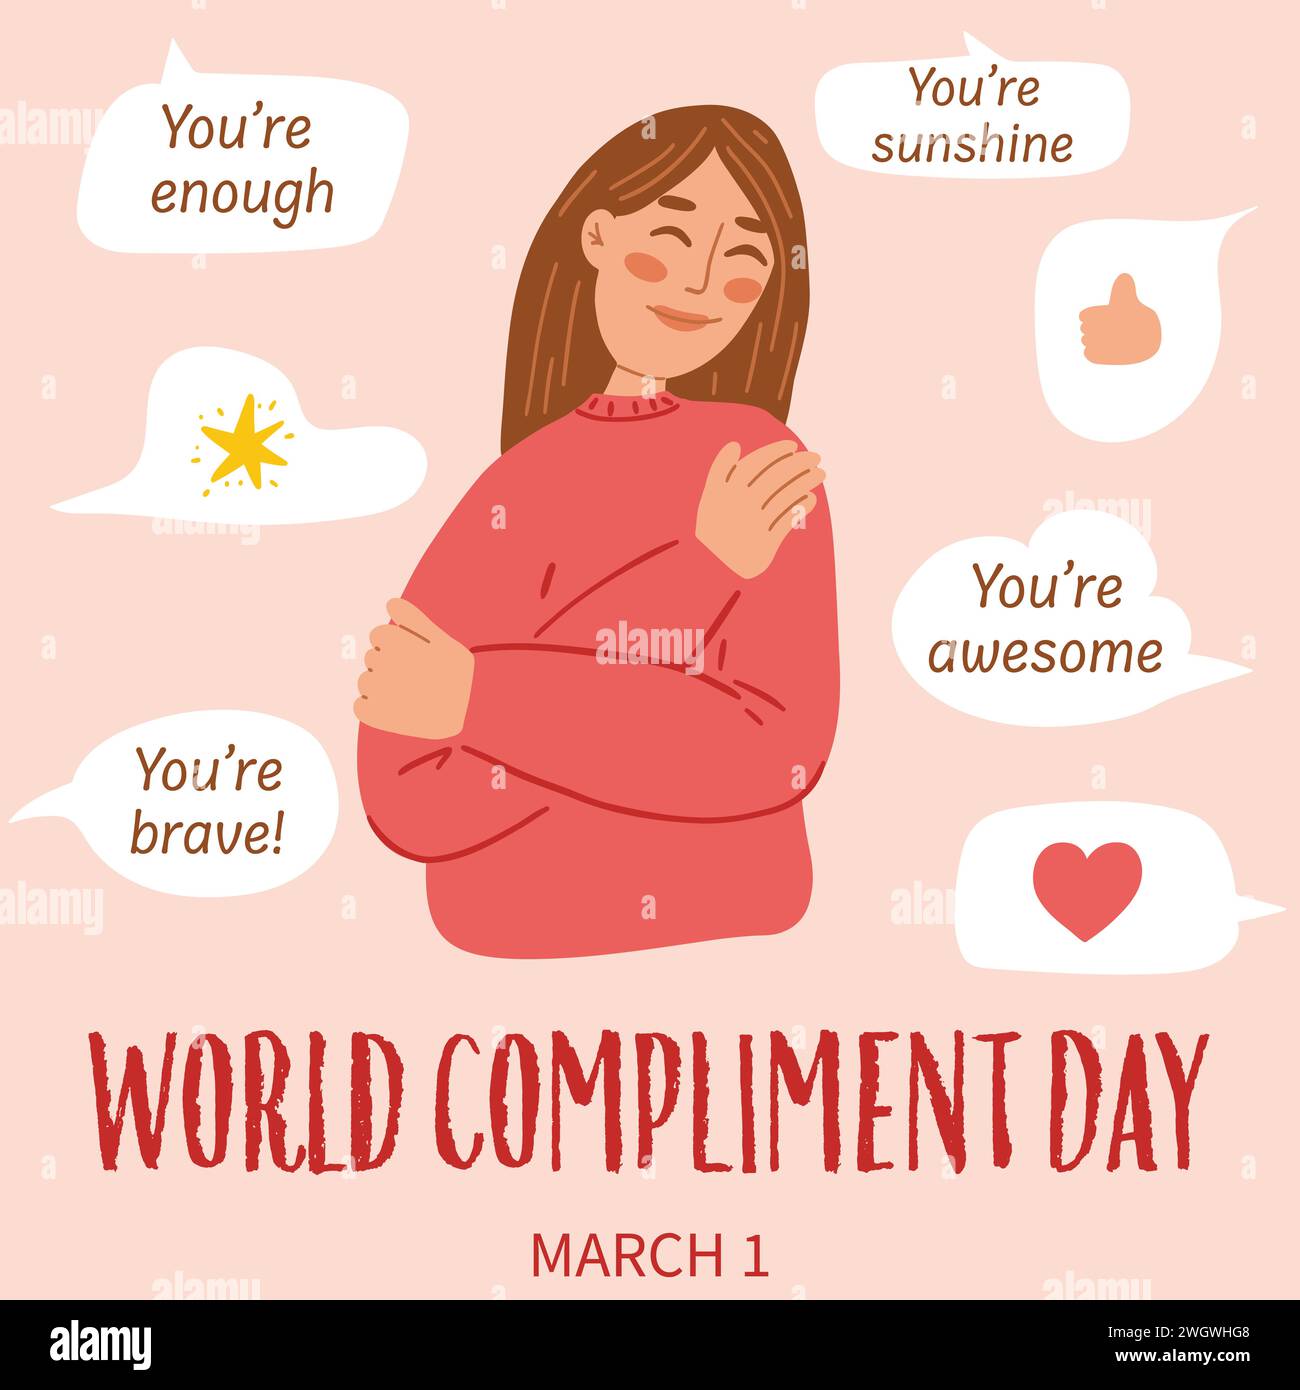 Concept of World Compliment Day. Hand drawn illustration of woman hugging herself. Stock Vector